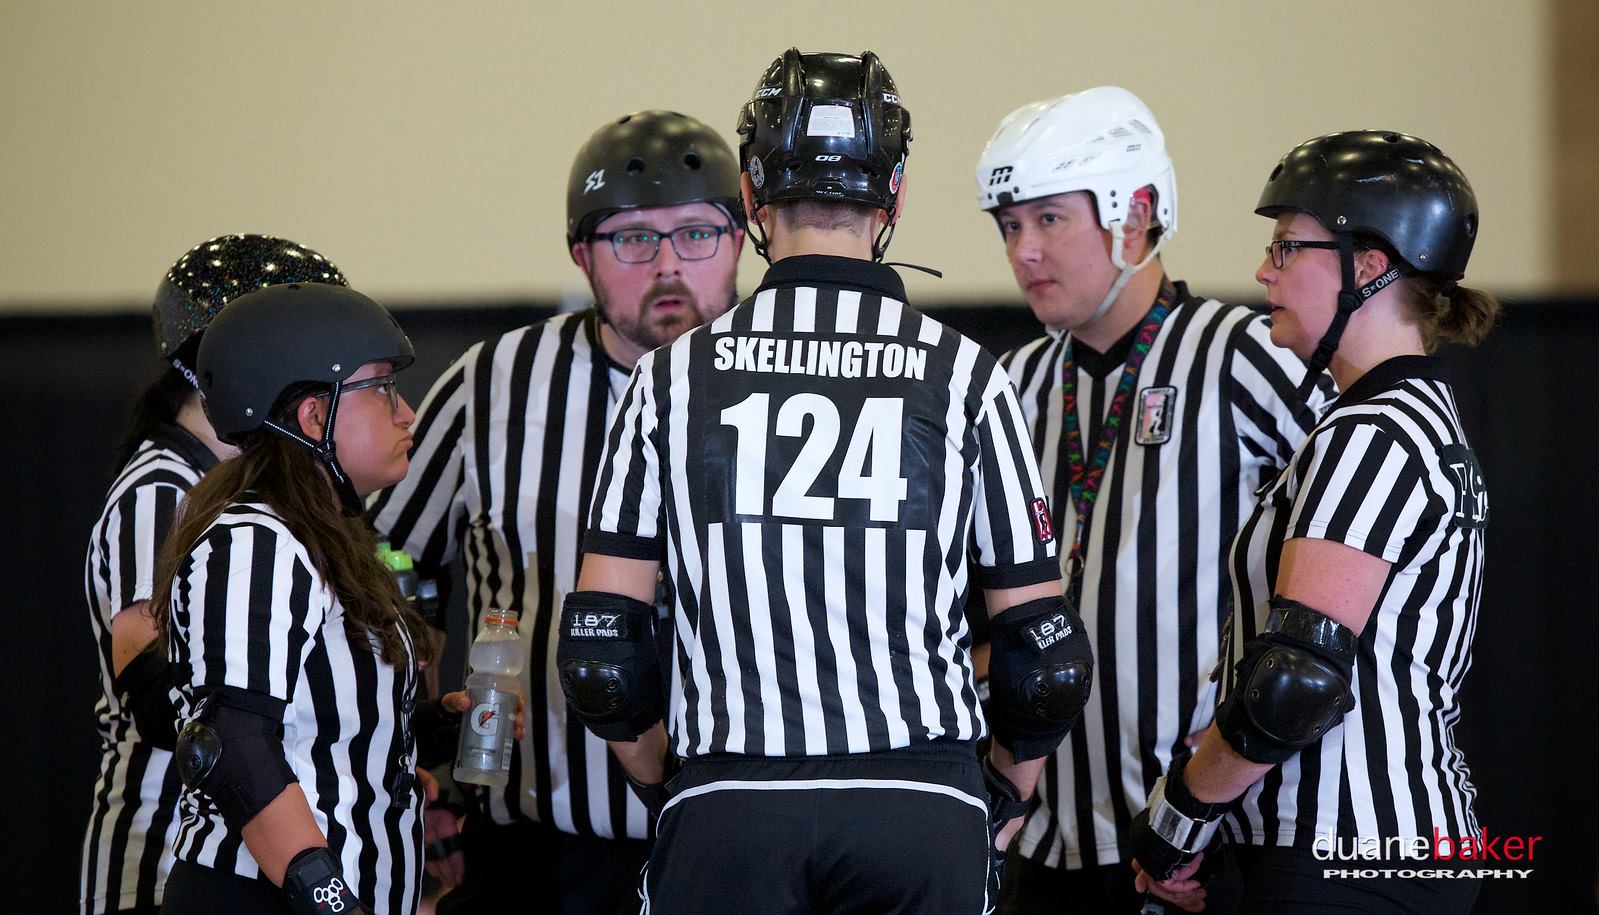  Thank you officials - Photo by Duane Baker Photography 